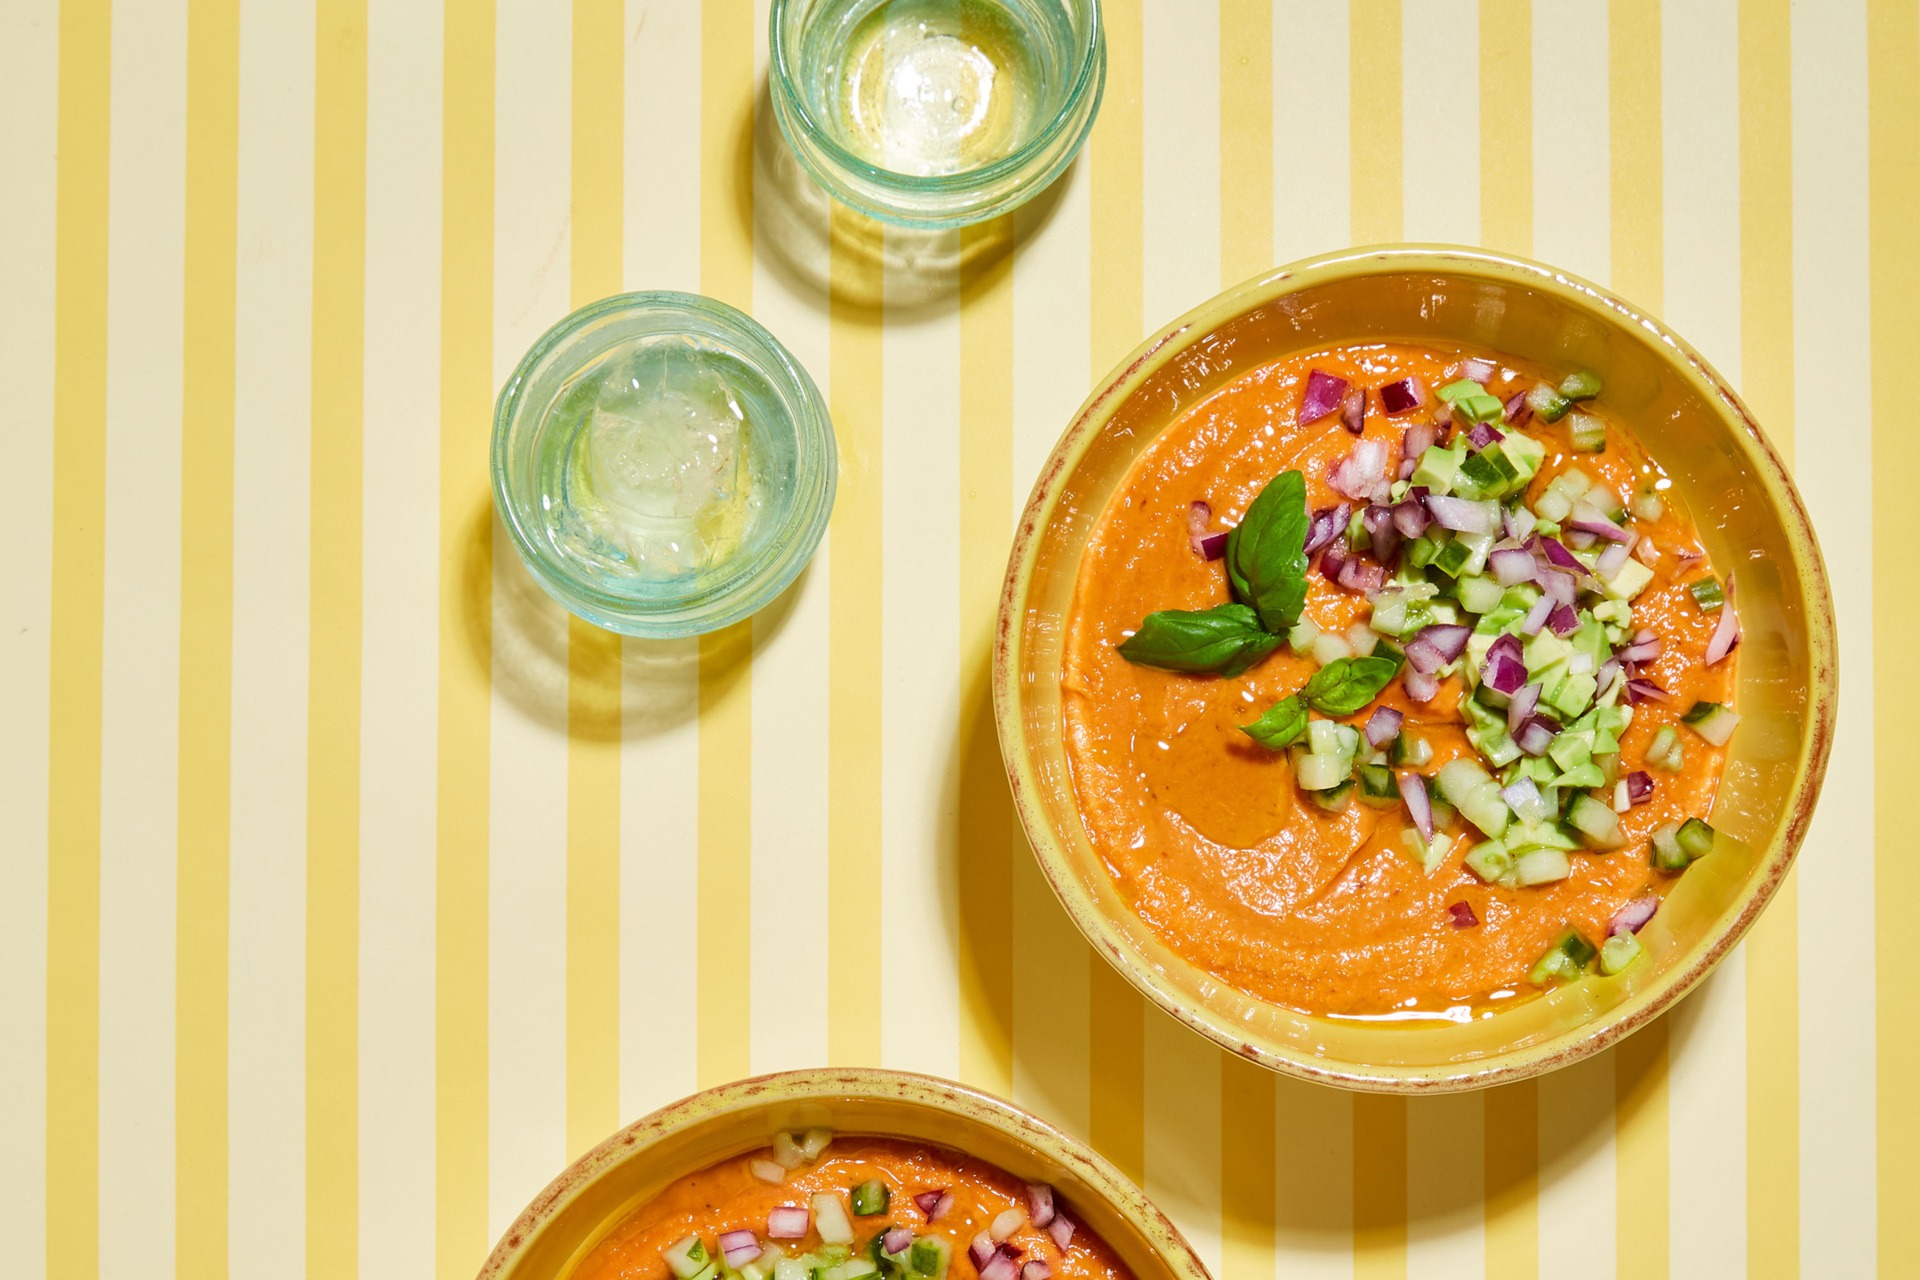 Salmorejo in bowls set on yellow striped table next to glasses of water